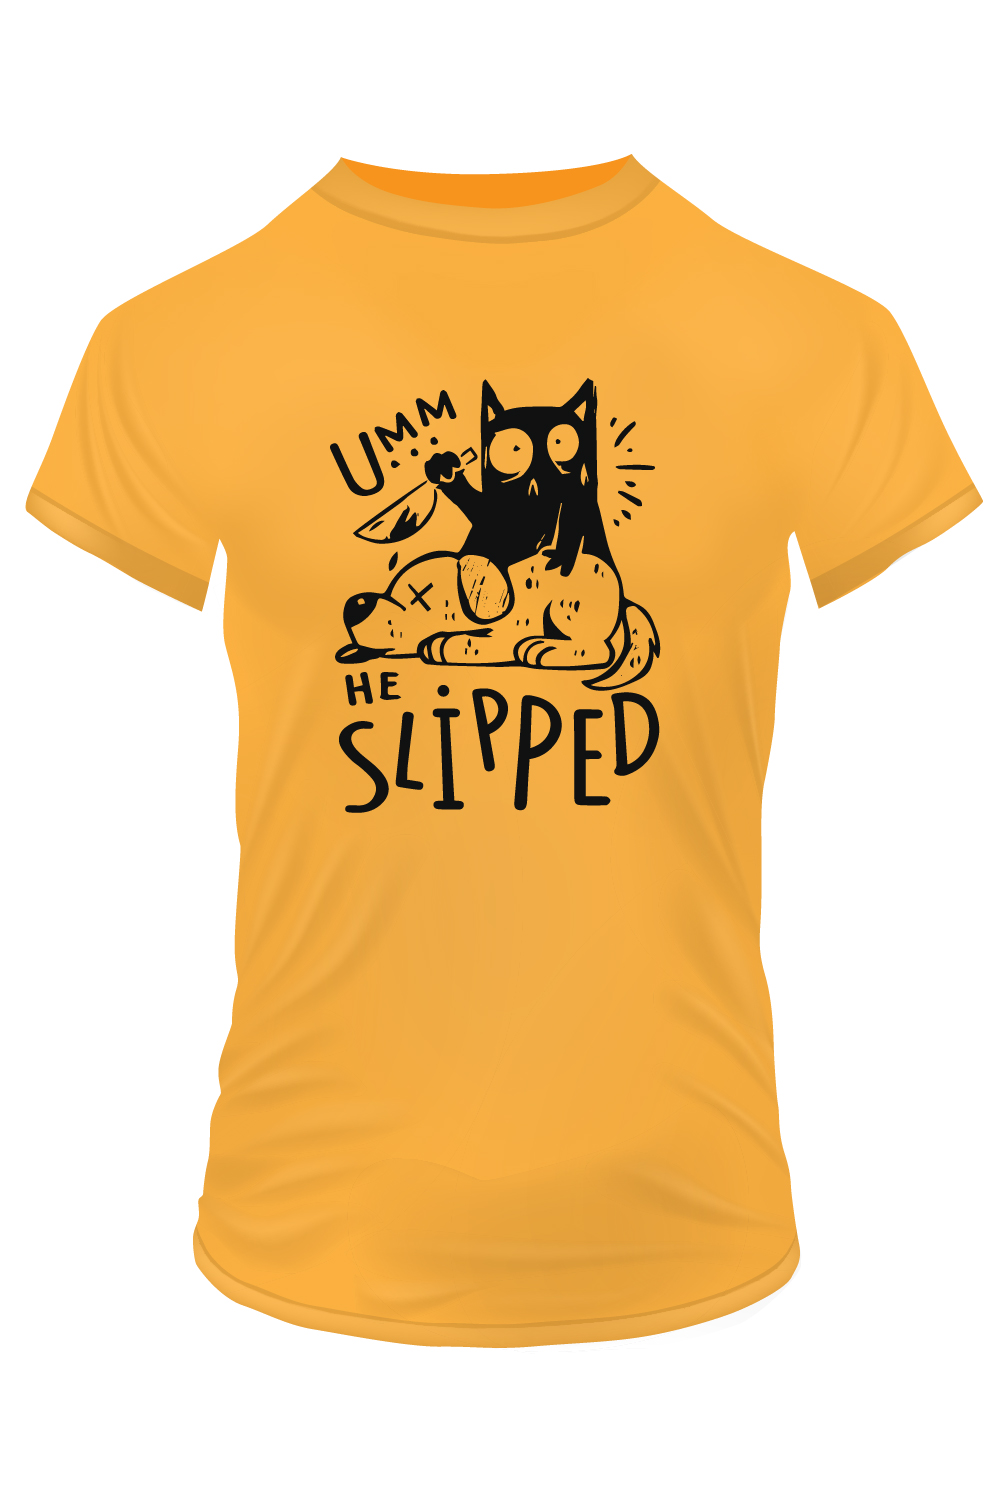 Umm, he slipped Cute funny cat killed or murdered the dog Vector Illustration for tshirt pinterest preview image.